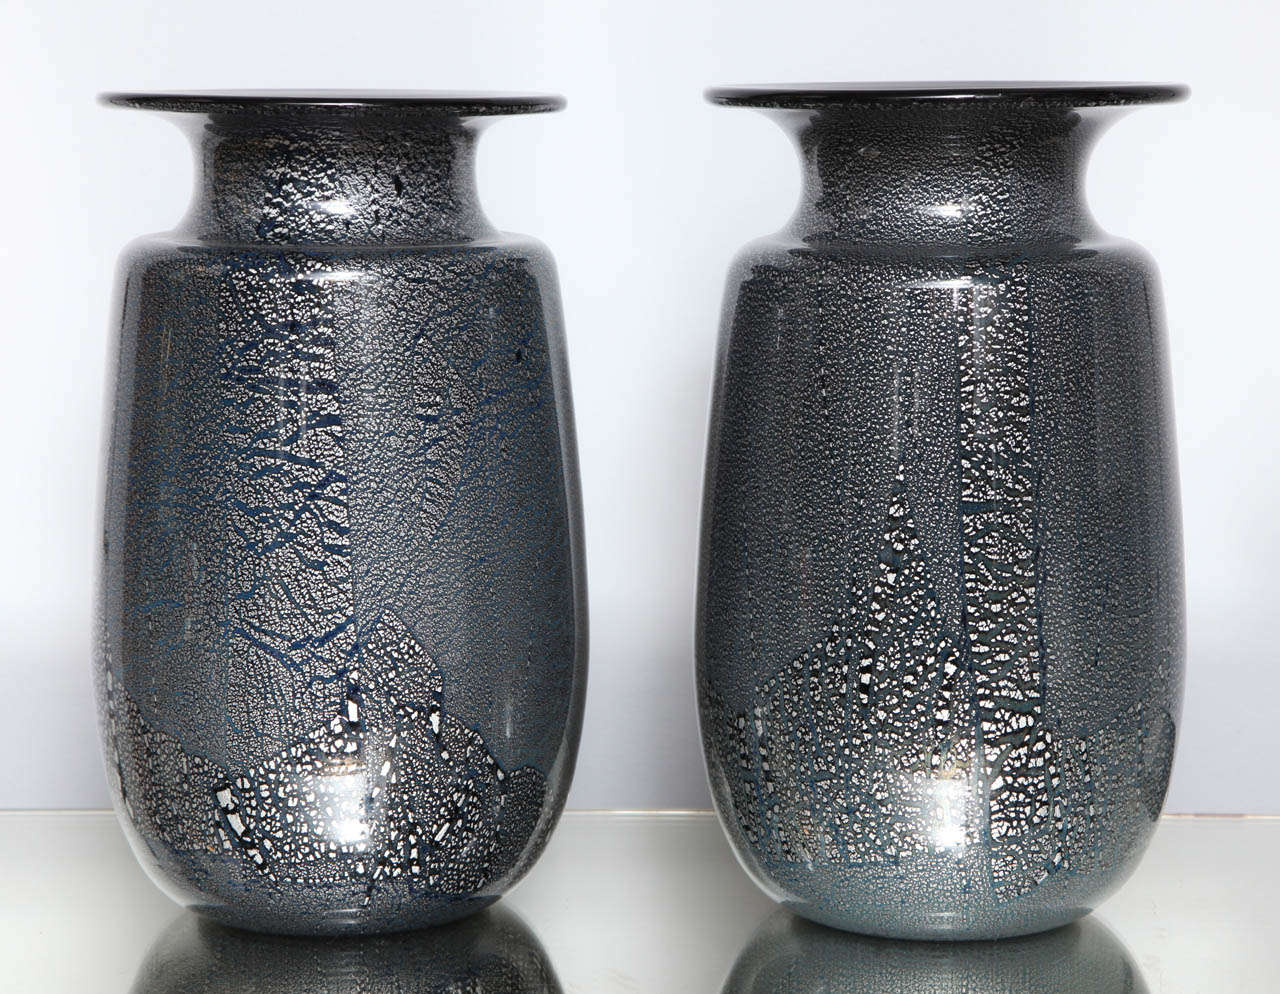 A beautiful pair of Murano glass vases attributed to Seguso Vetri d'Arte with cased silver leaf in clear glass over 'black/blue' glass.